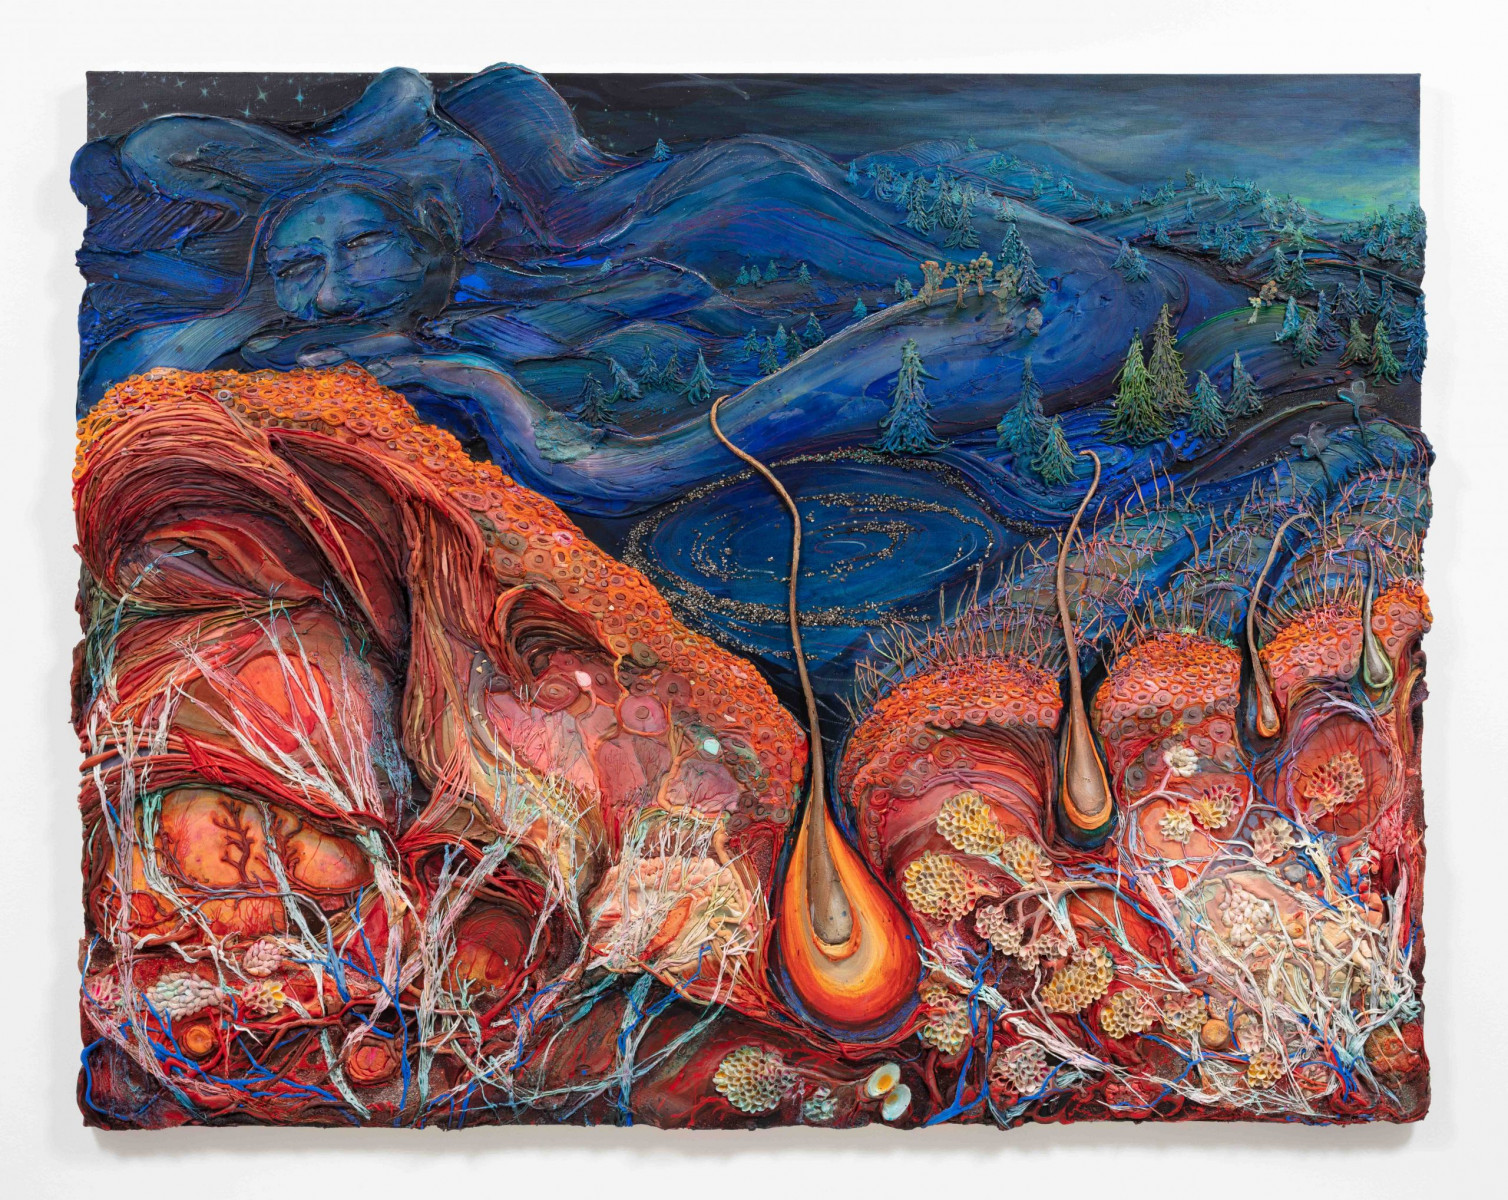 Kate Klingbeil. <em>Freeze</em>, 2023. Acrylic, pigment, vinyl paint, pumice, sand, shells and rocks collected from Lake Michigan, ceramic, and oil stick on canvas, 67 x 86 x 2 1/2 inches  (170.2 x 218.4 x 6.4 cm)